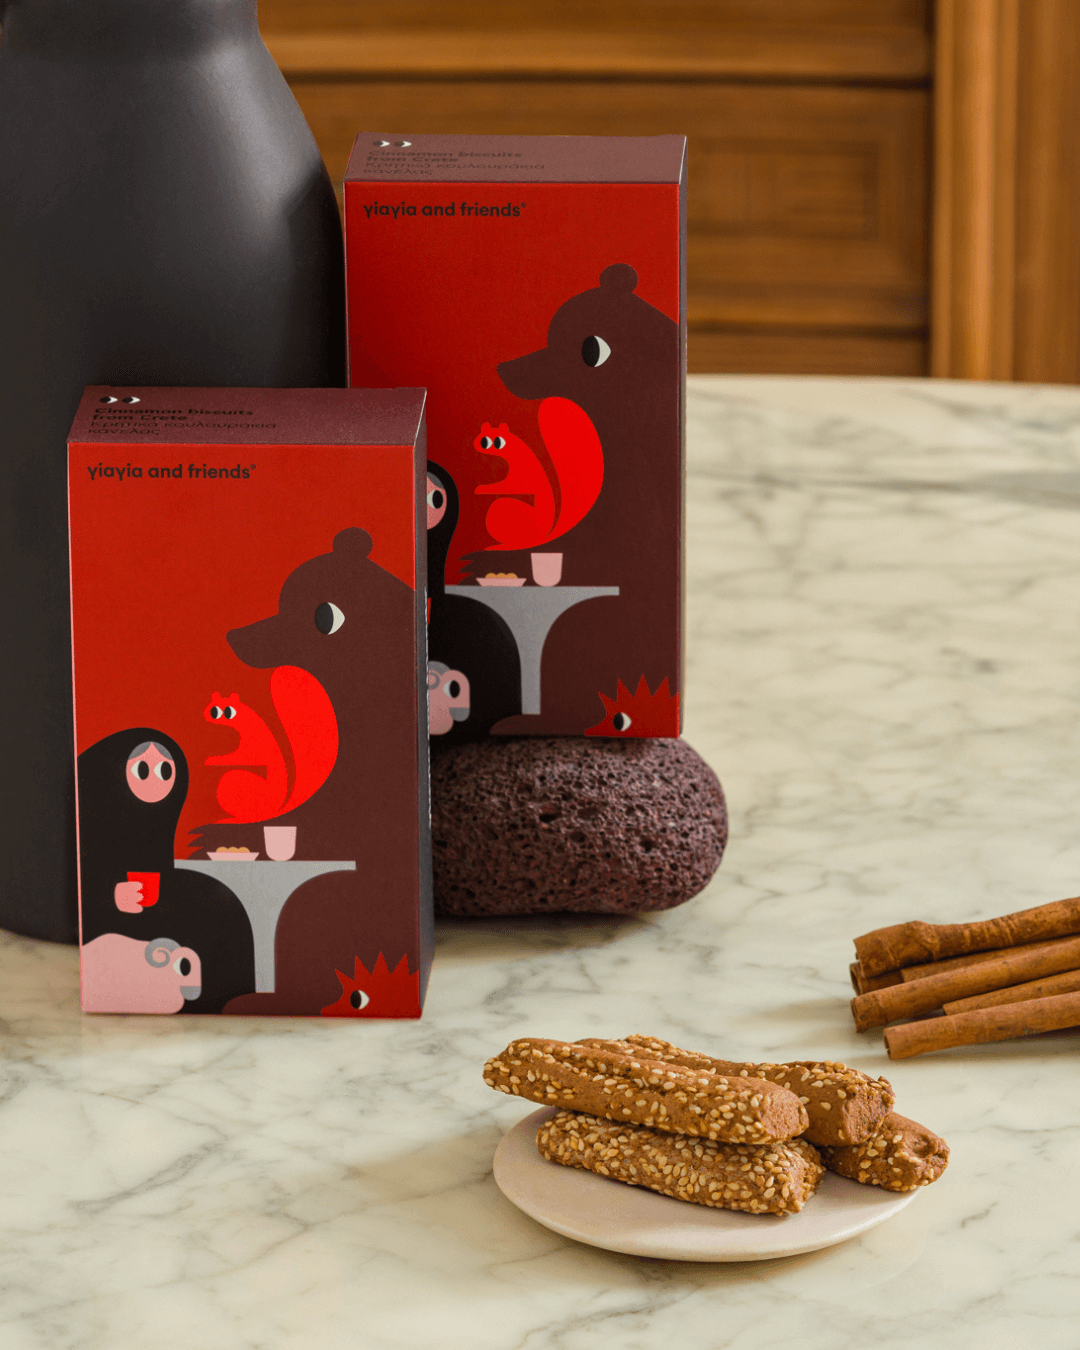 Cinnamon Biscuits from Crete, 120g